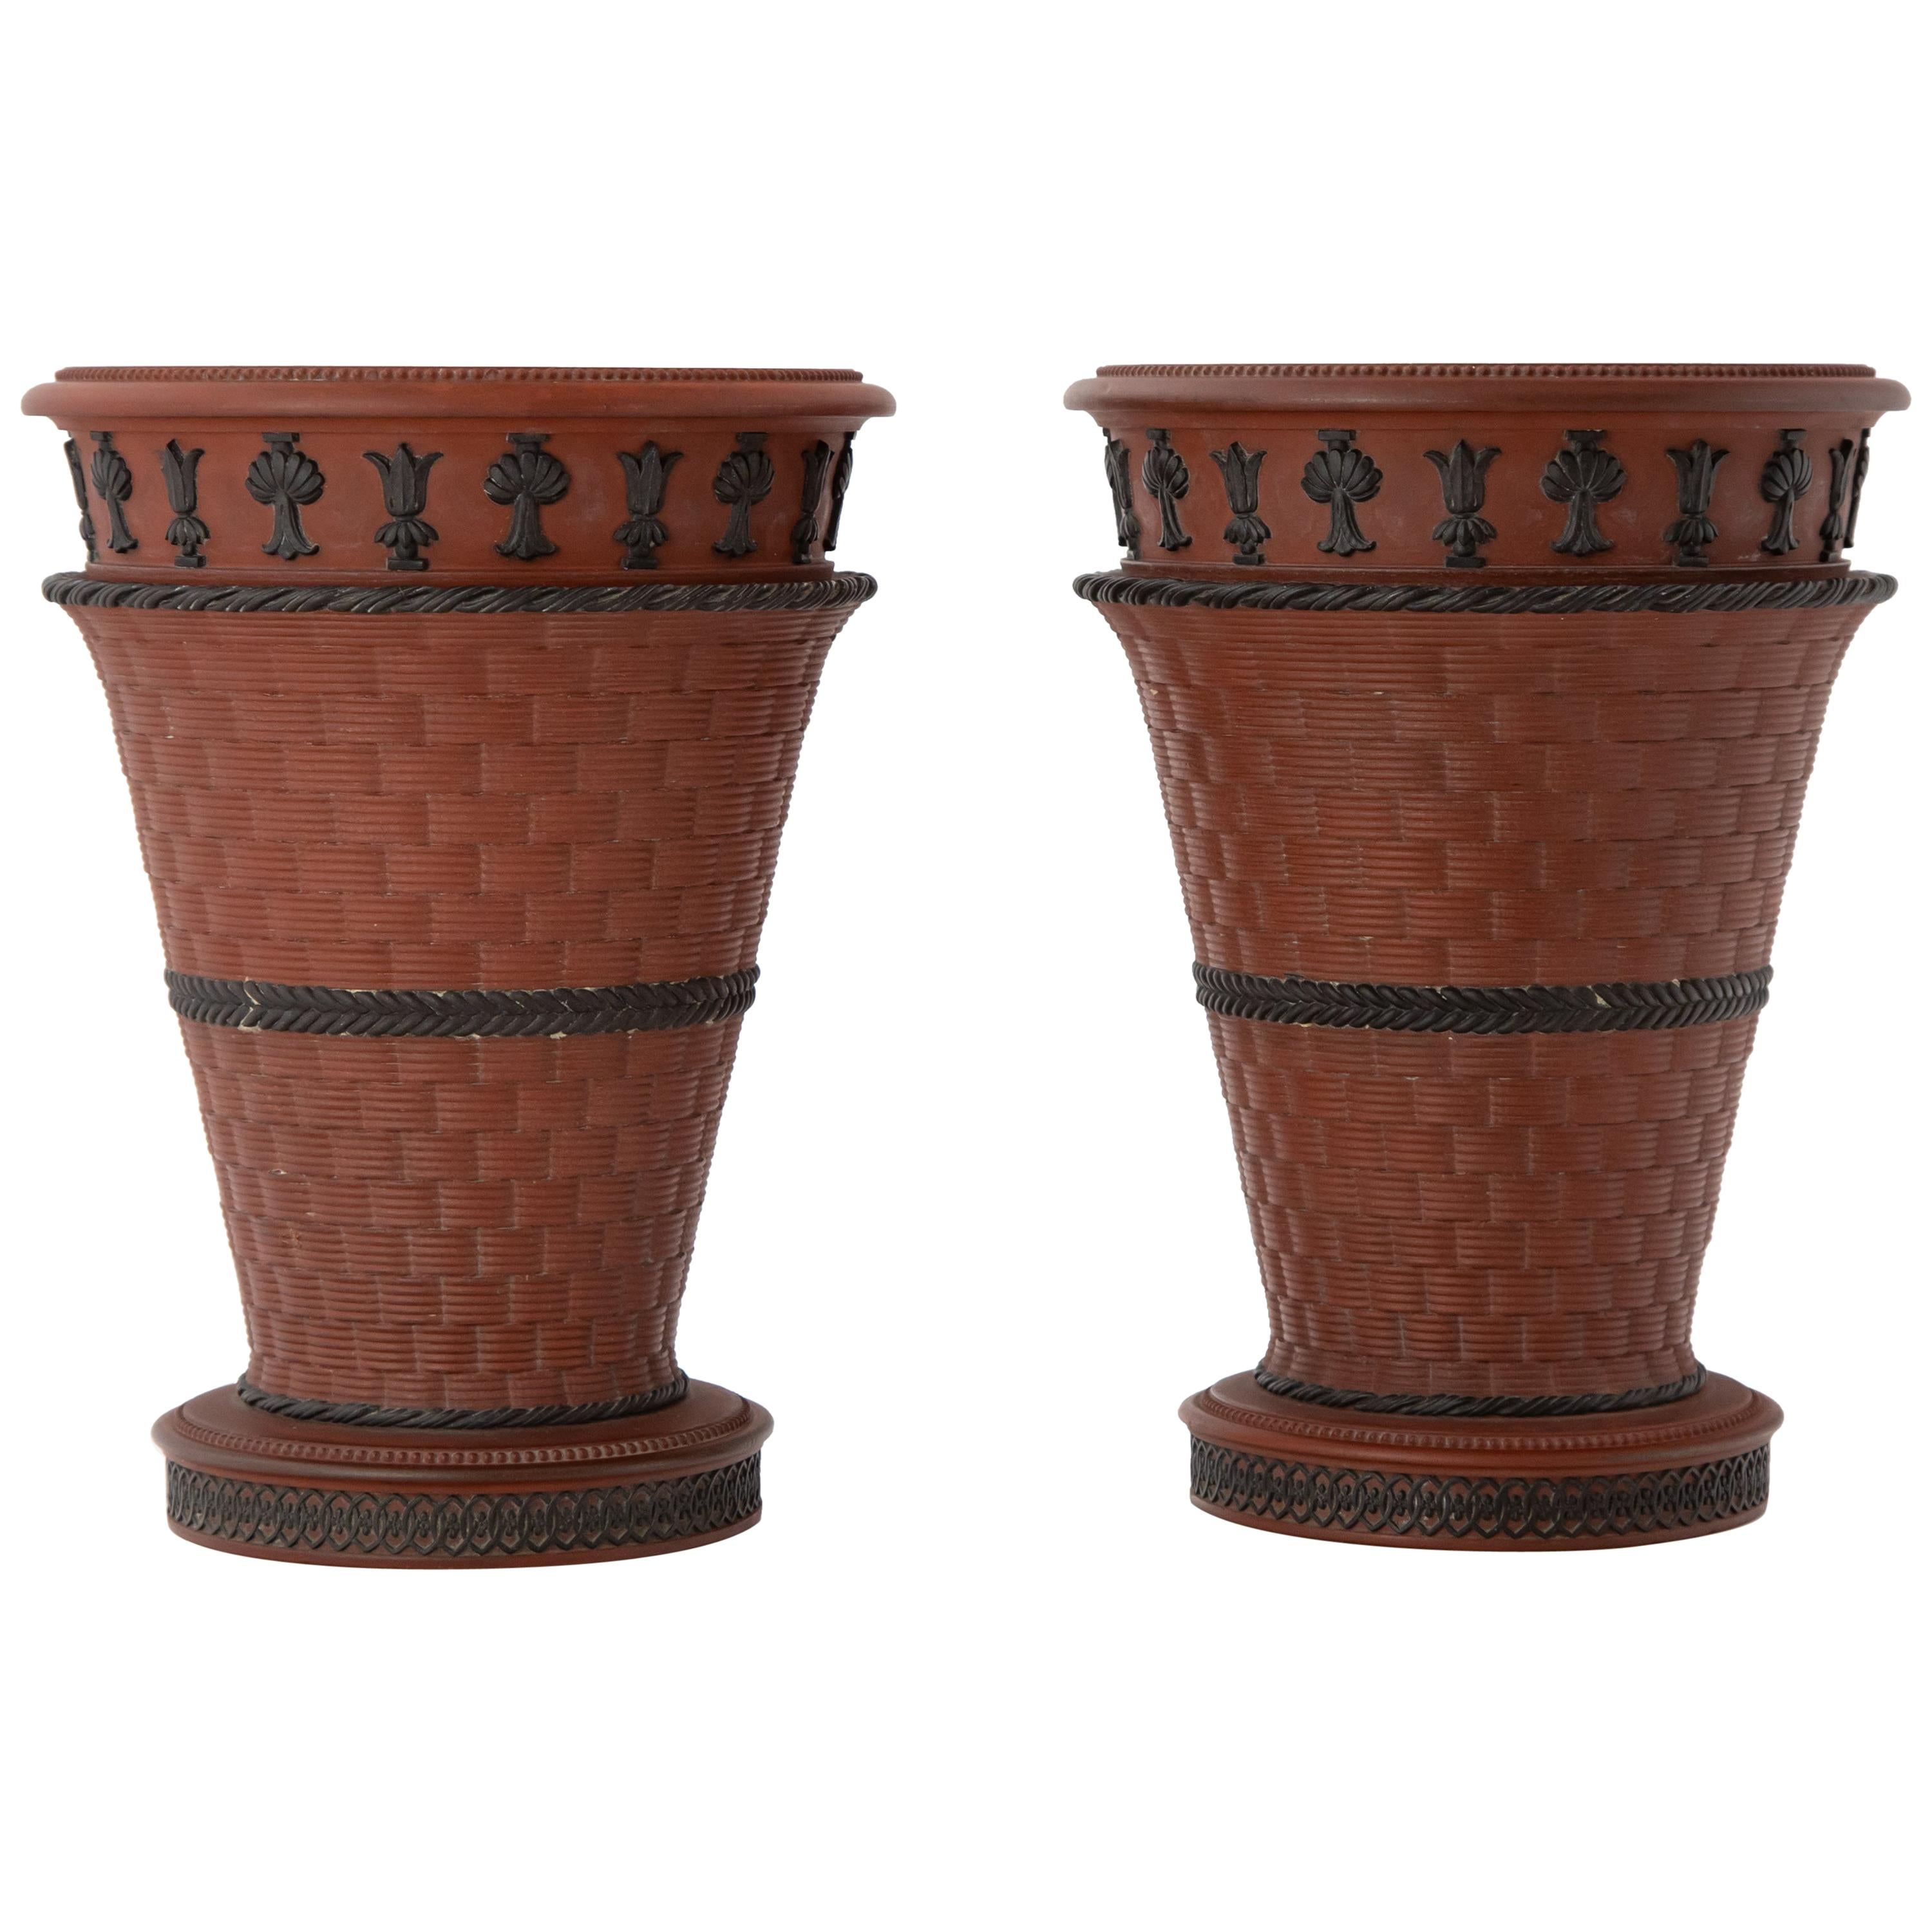 Pair of Early Wedgwood Rosso Antico Jardinières